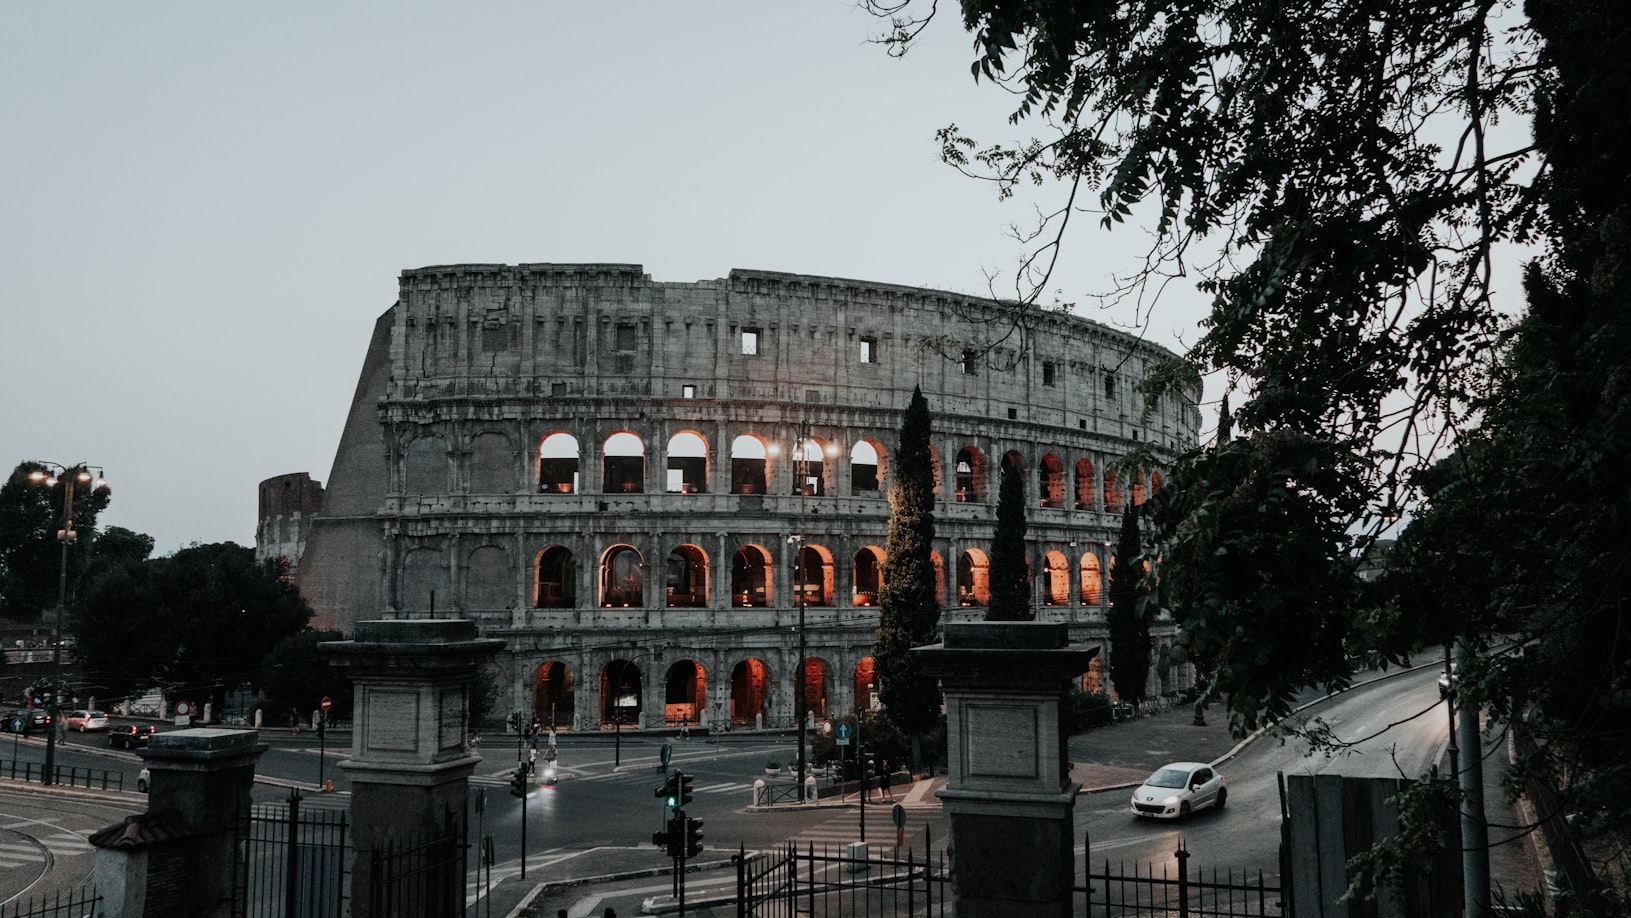 The Colosseum in Rome could hold up to 50,000 people